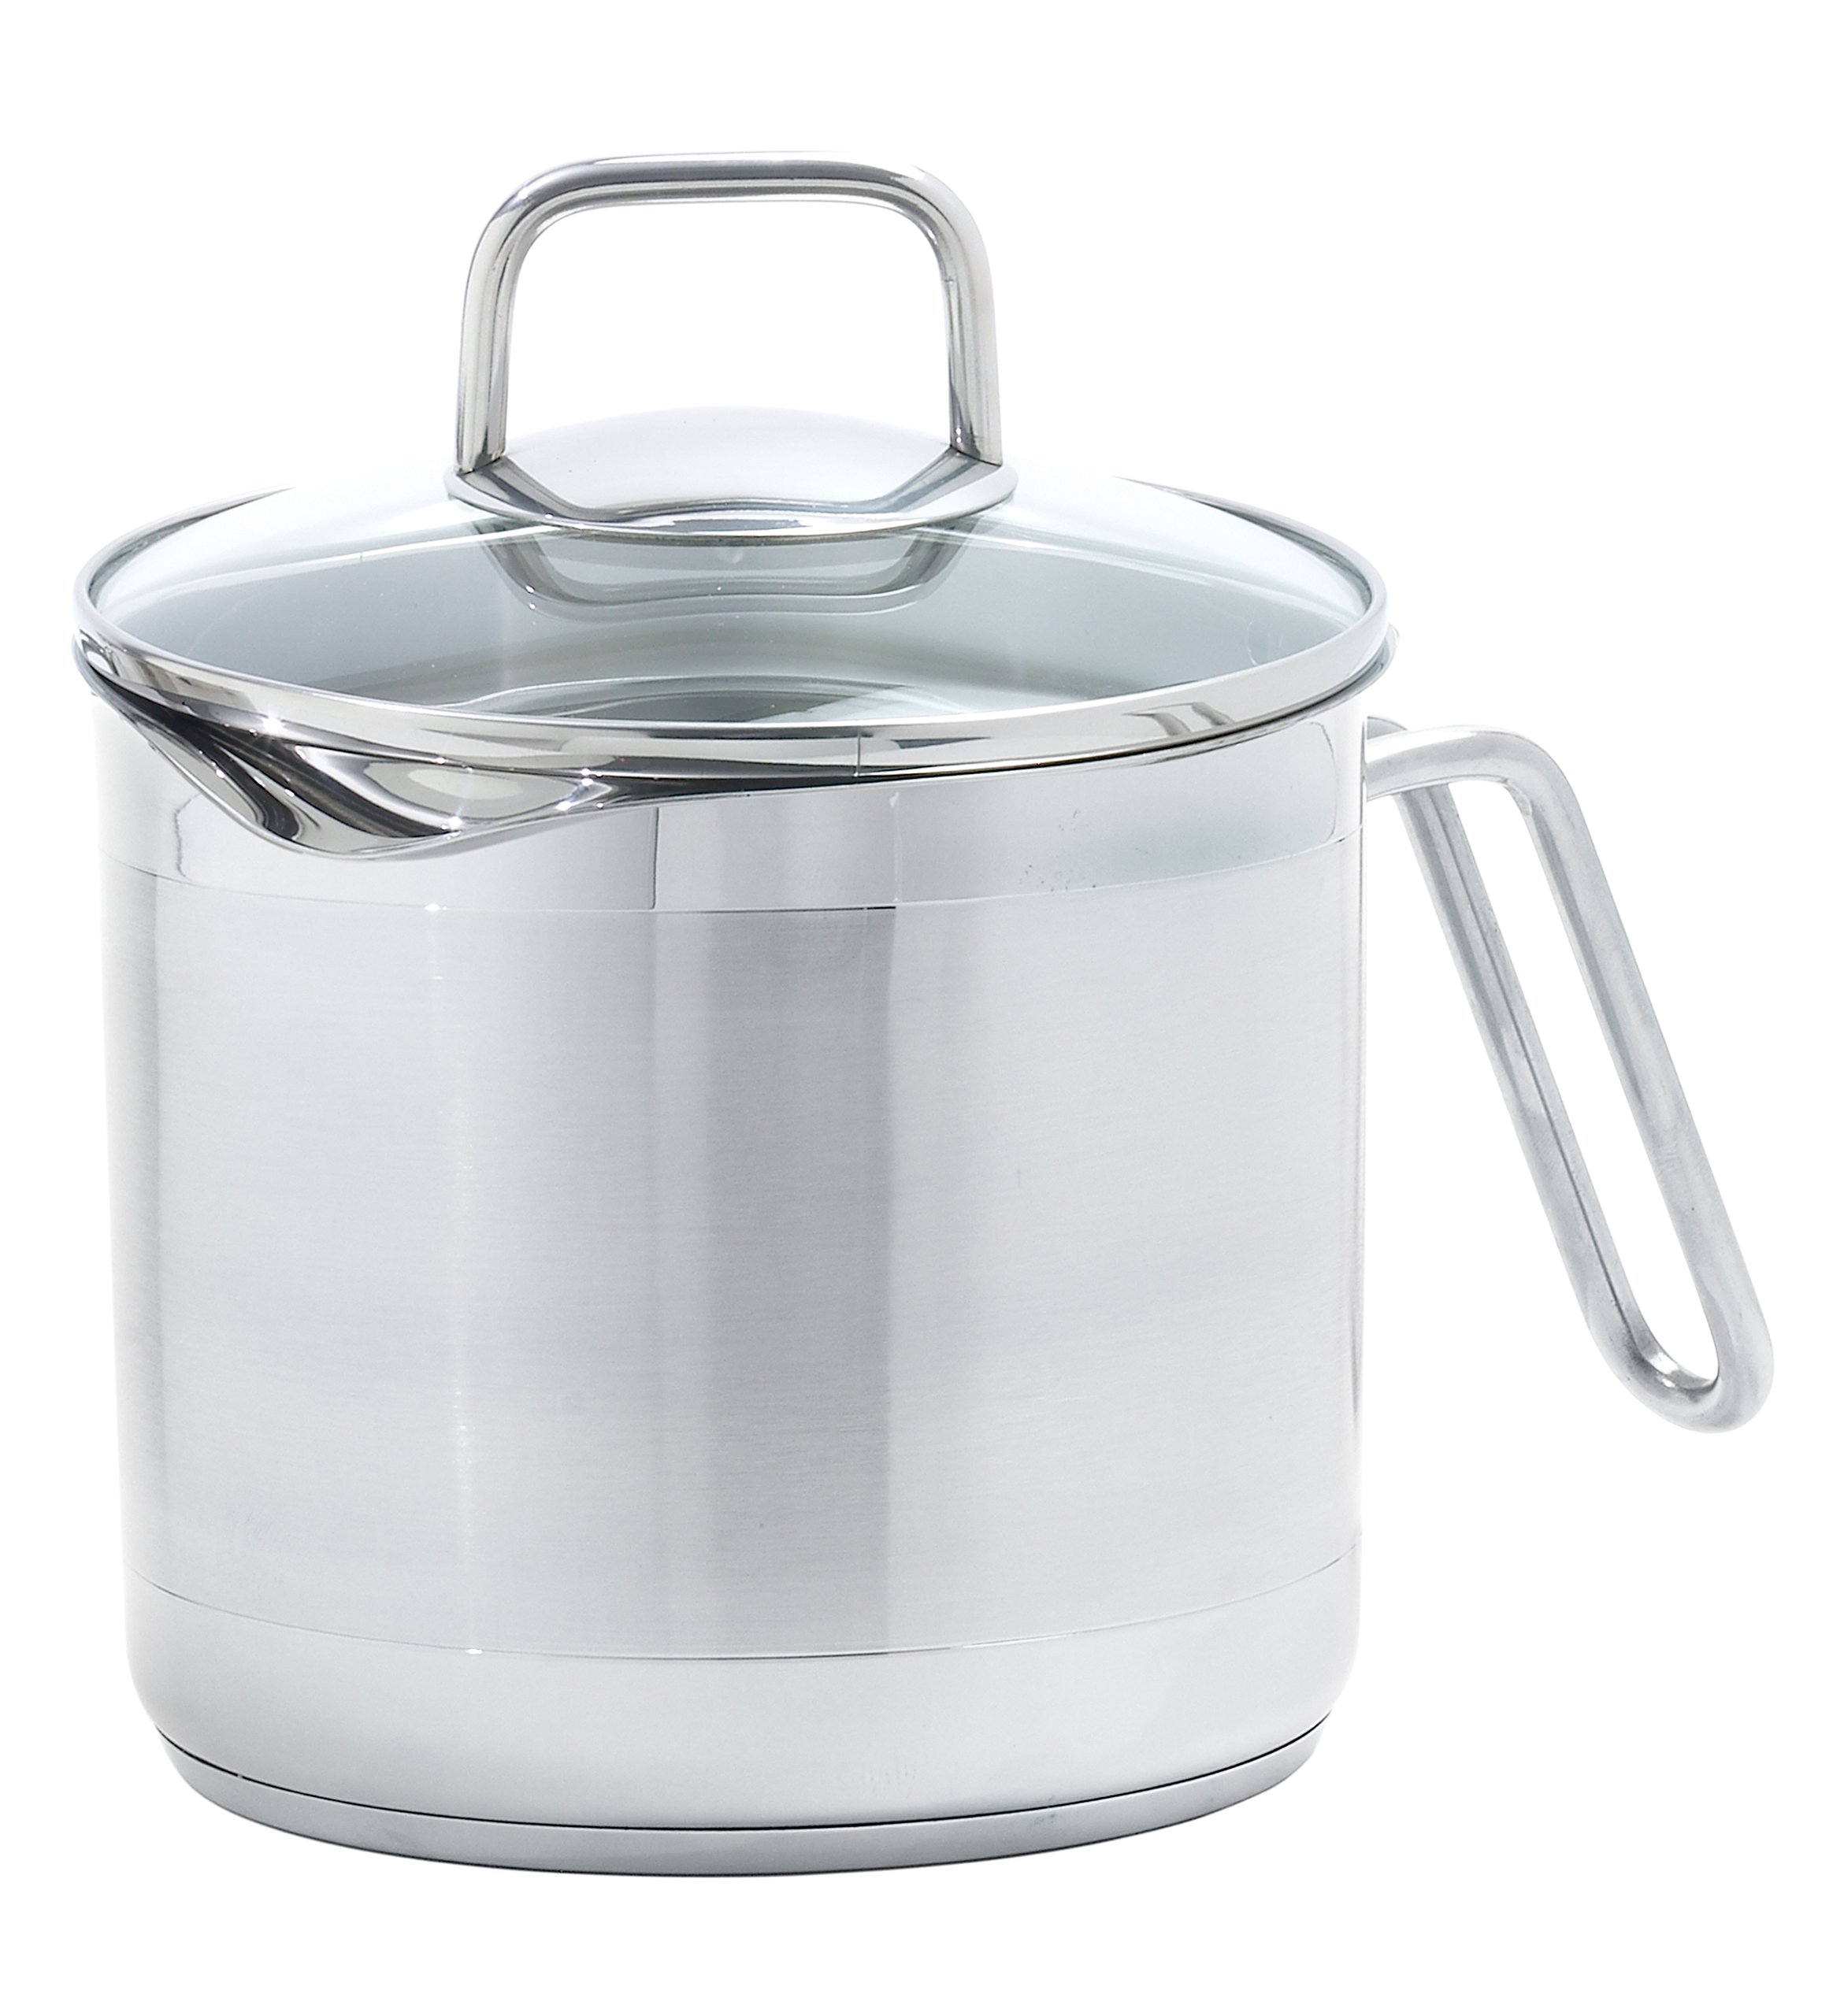 Norpro 8 Cup Multi Pot with Straining Lid, 1.9 Liter, Silver